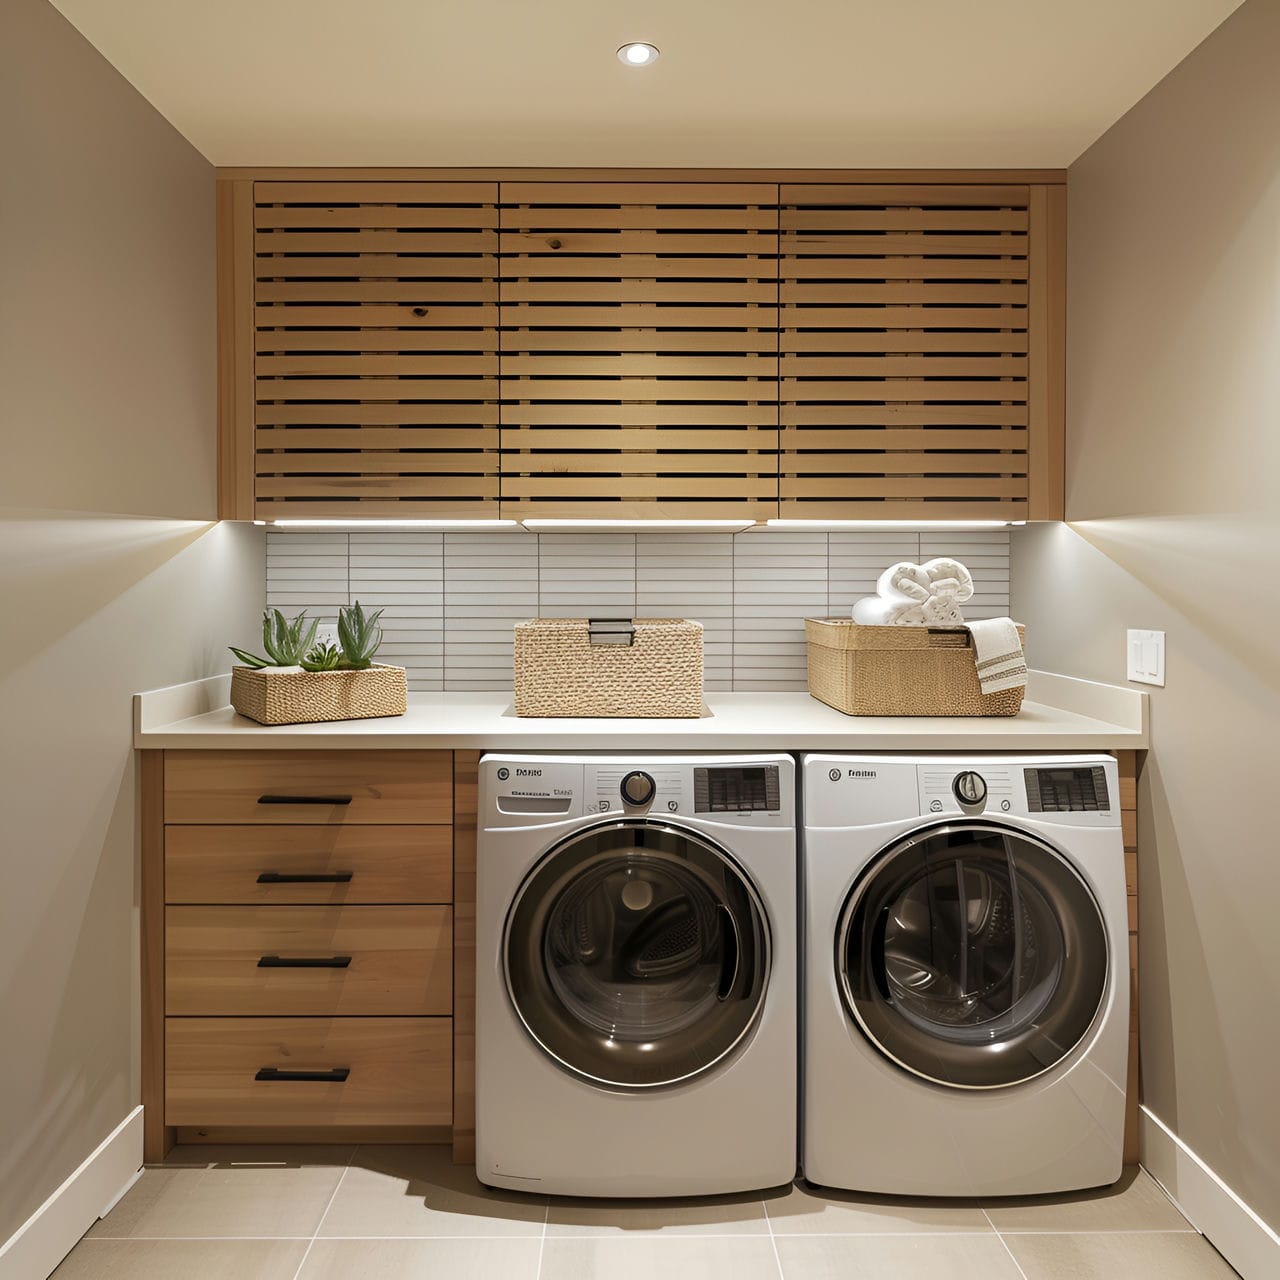 Laundry room: size, functionality, uses, furniture and renovation